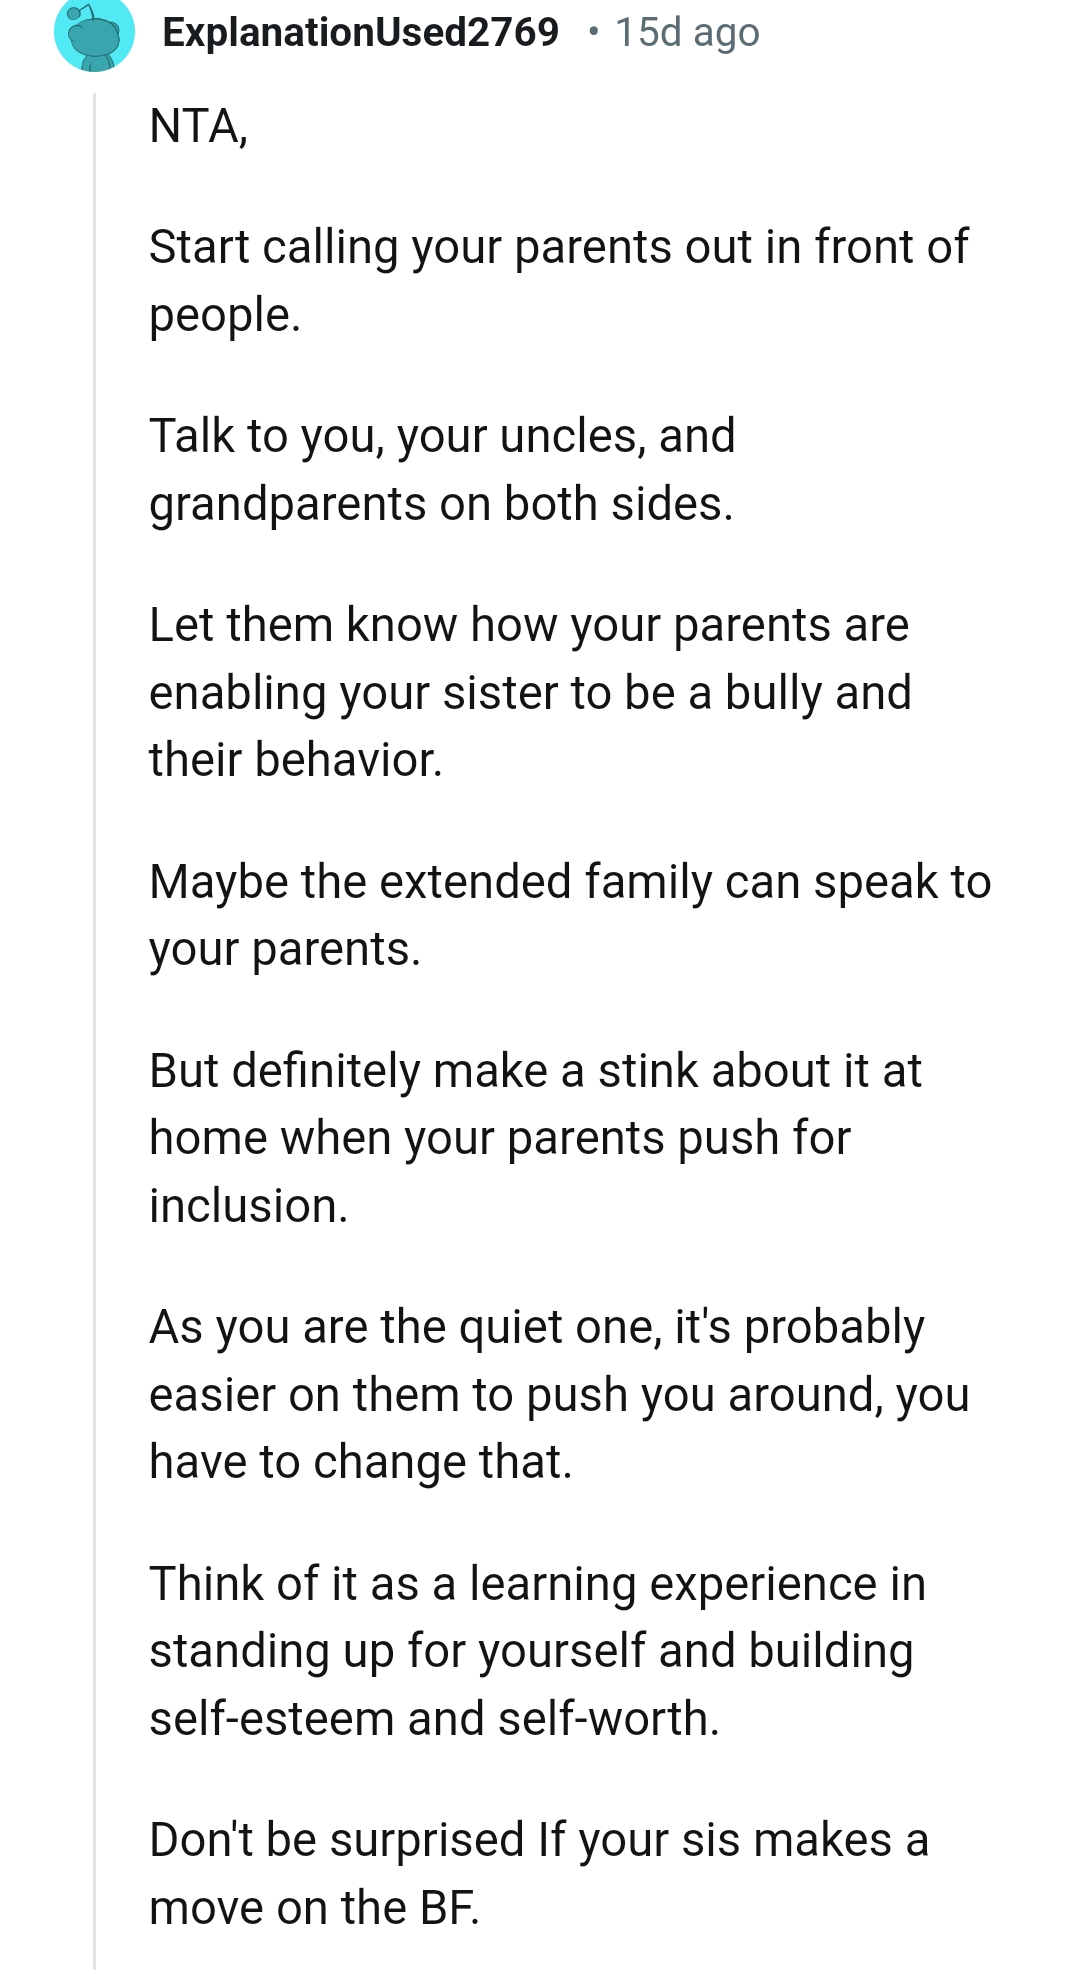 The extended family can speak to them